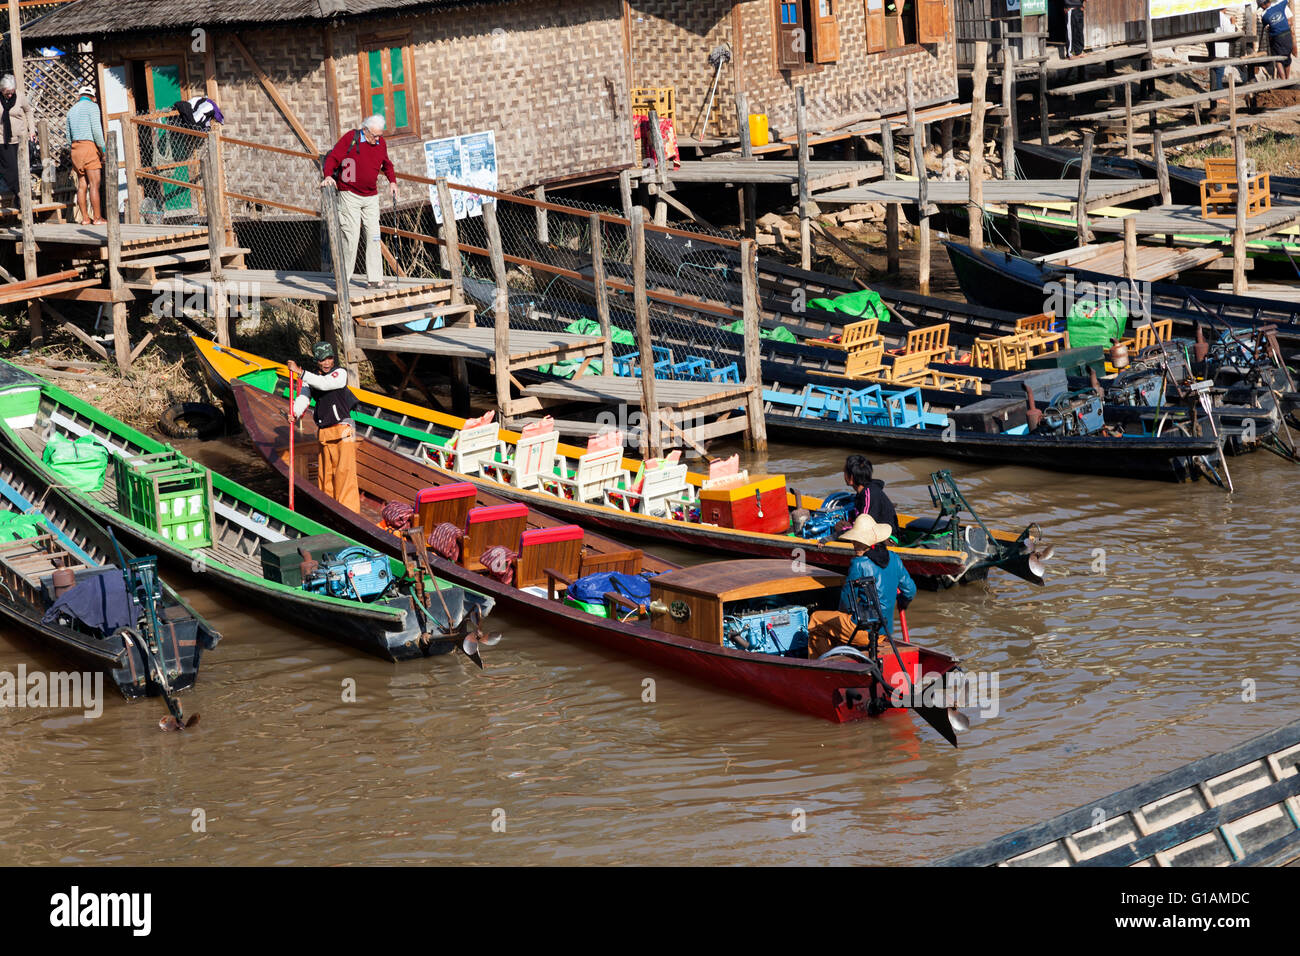 At Nyaungshwe, the landing stage from which tourists start to have a trip around the Inle Lake (Myanmar). Stock Photo